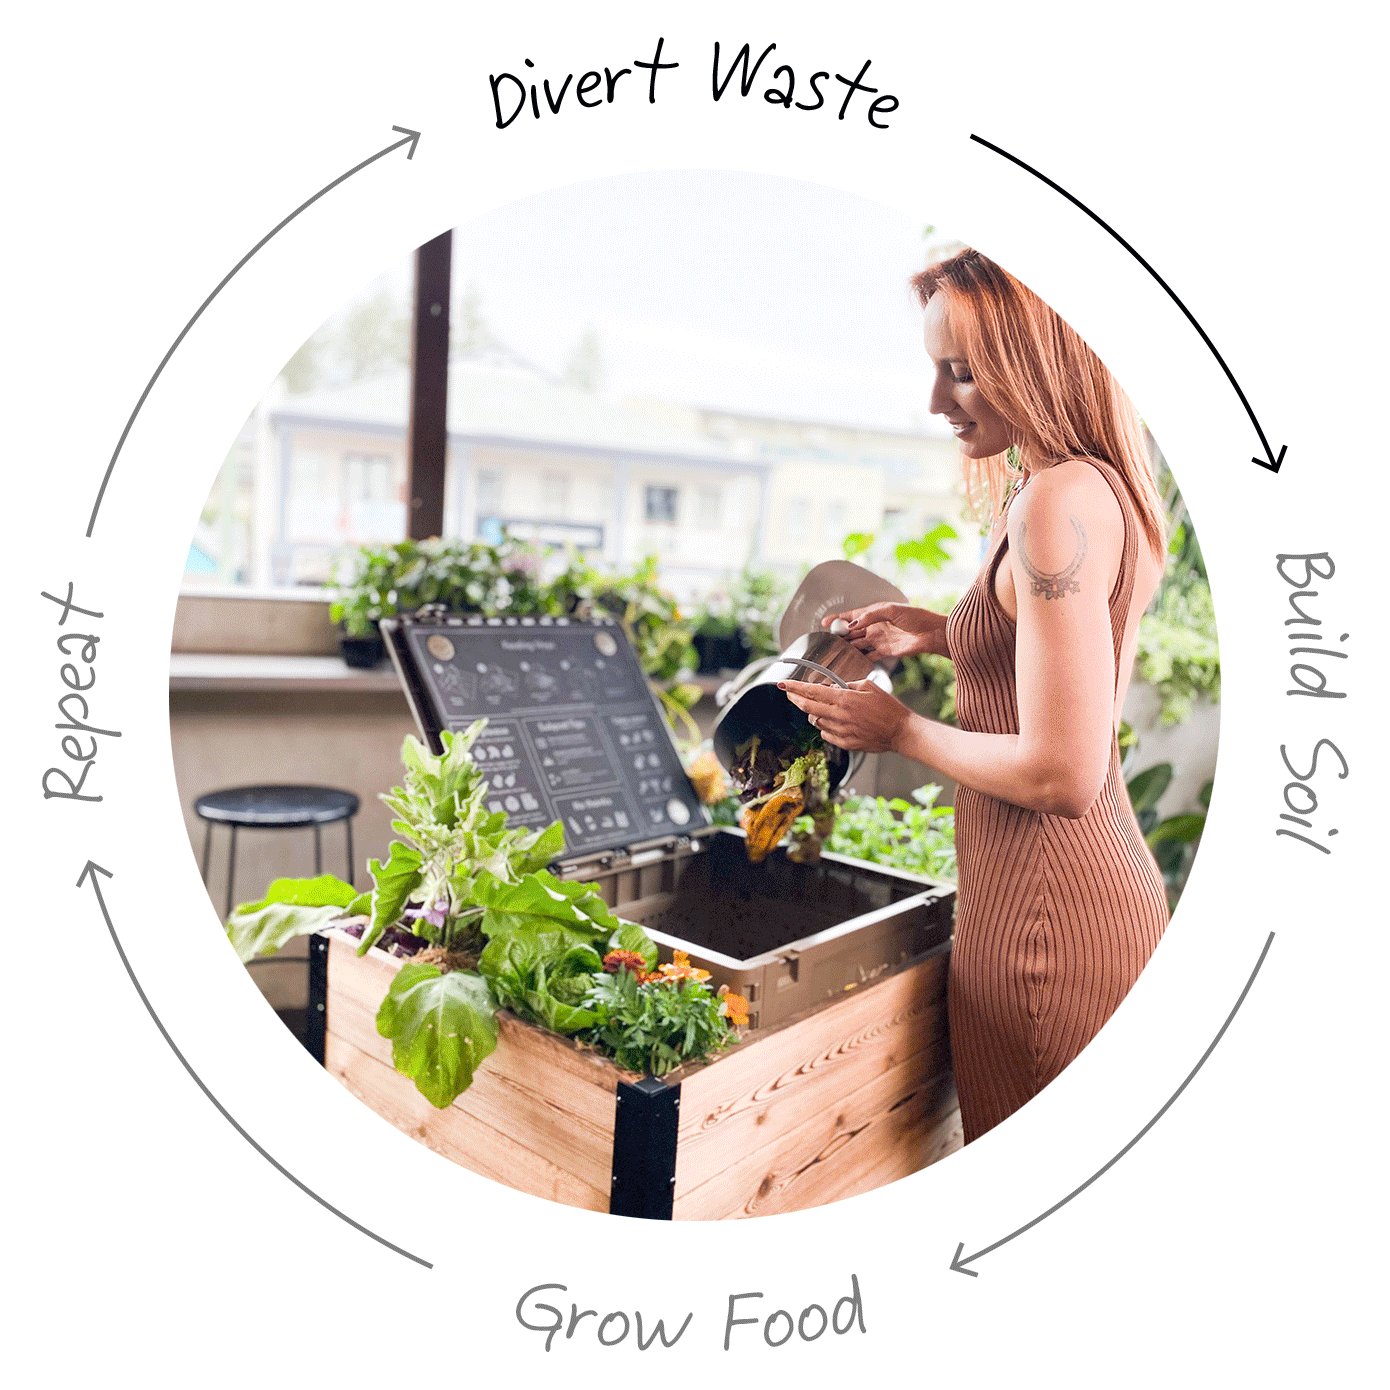 vermicomposting, in-ground compost system, home composting, balcony composting, small space growing, apartment planter box, modbed, subpod 